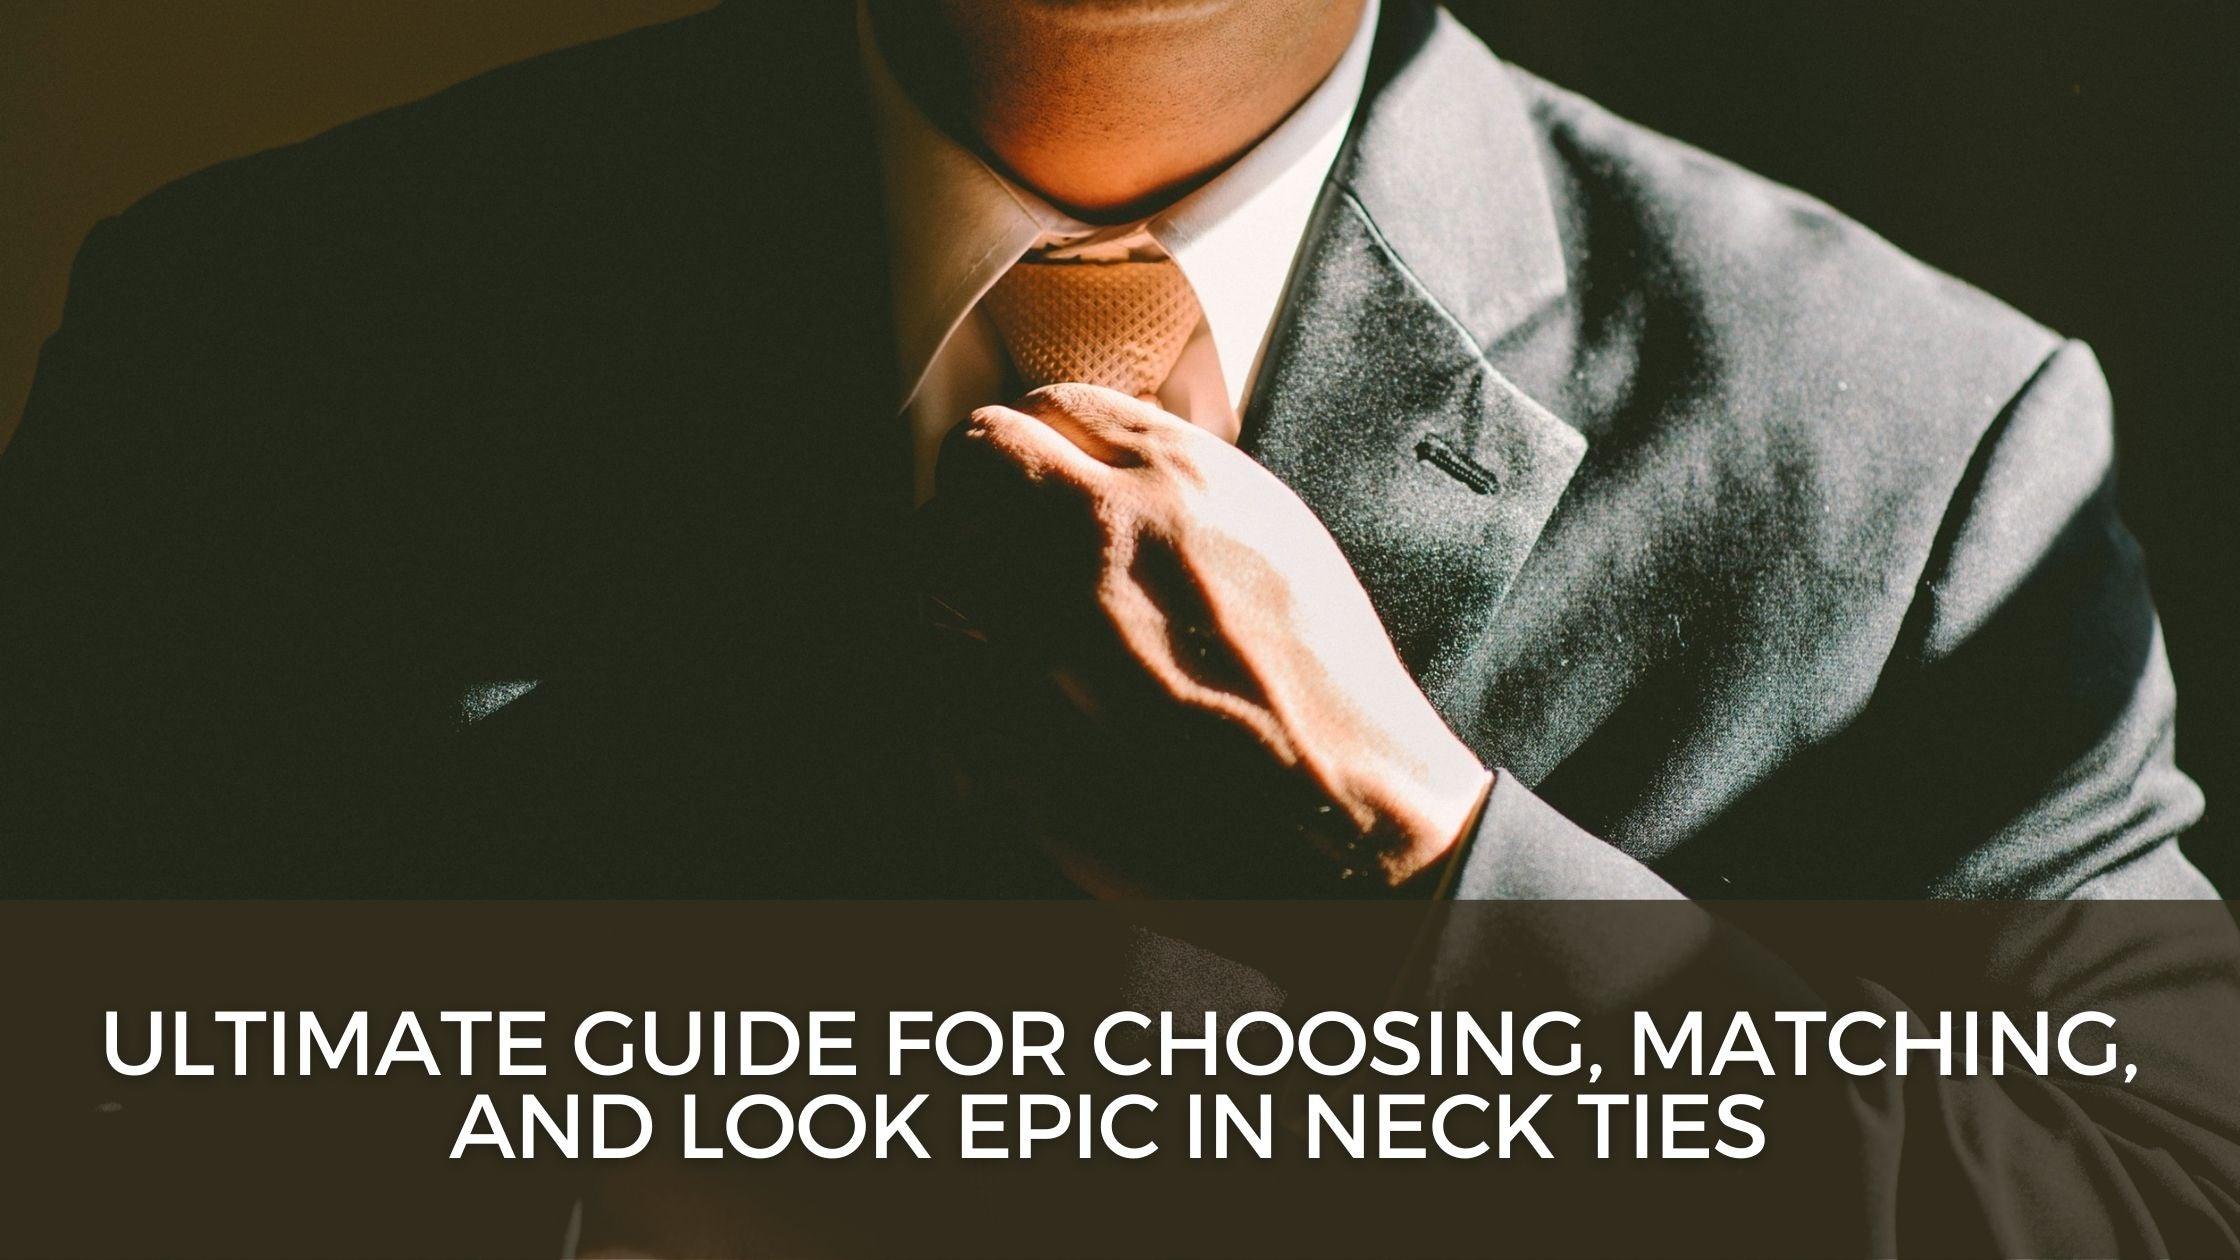 Neck Tie Styles for Job Interview - How to Tie a Tie to Get the Job! –  Mandujour